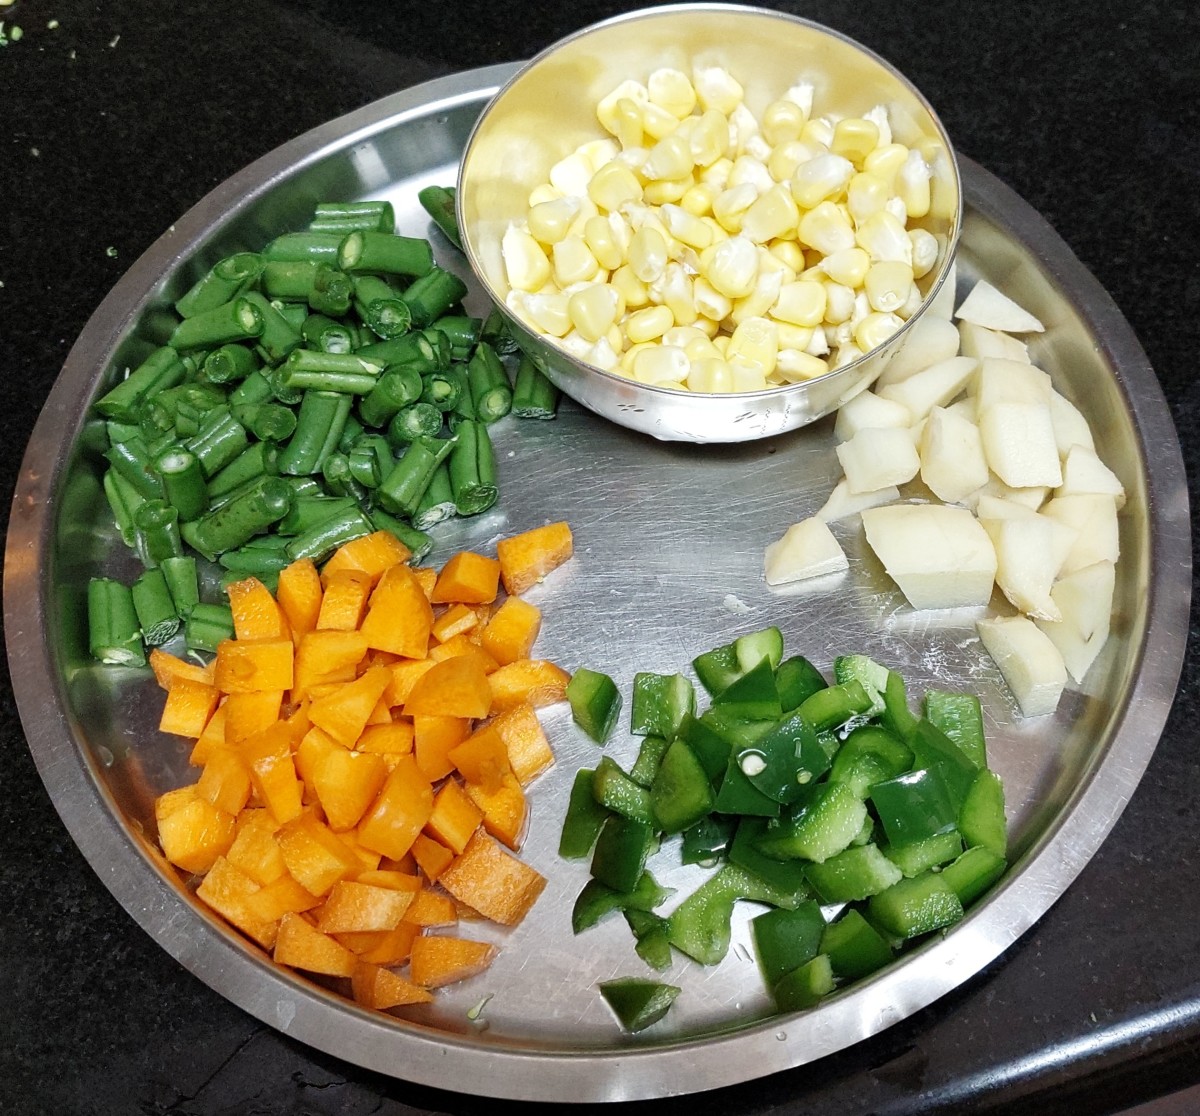 Wash and chop French beans, carrots, and capsicum. Peel and chop potatoes. Keep sweet corn ready. Set aside.